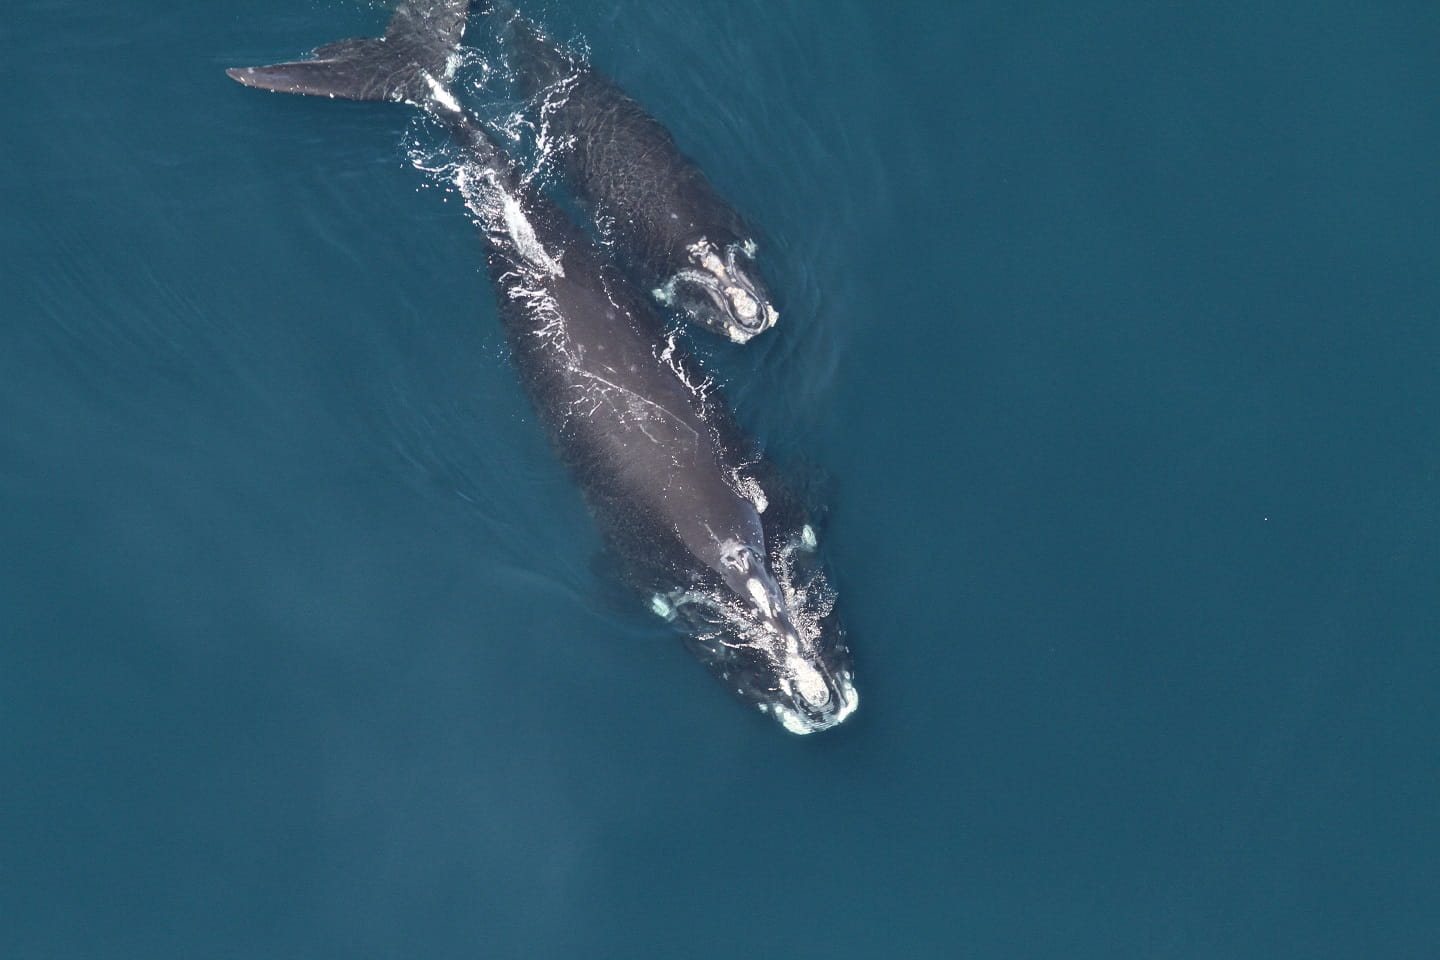 Mother Right whale with calf swimming in the ocean